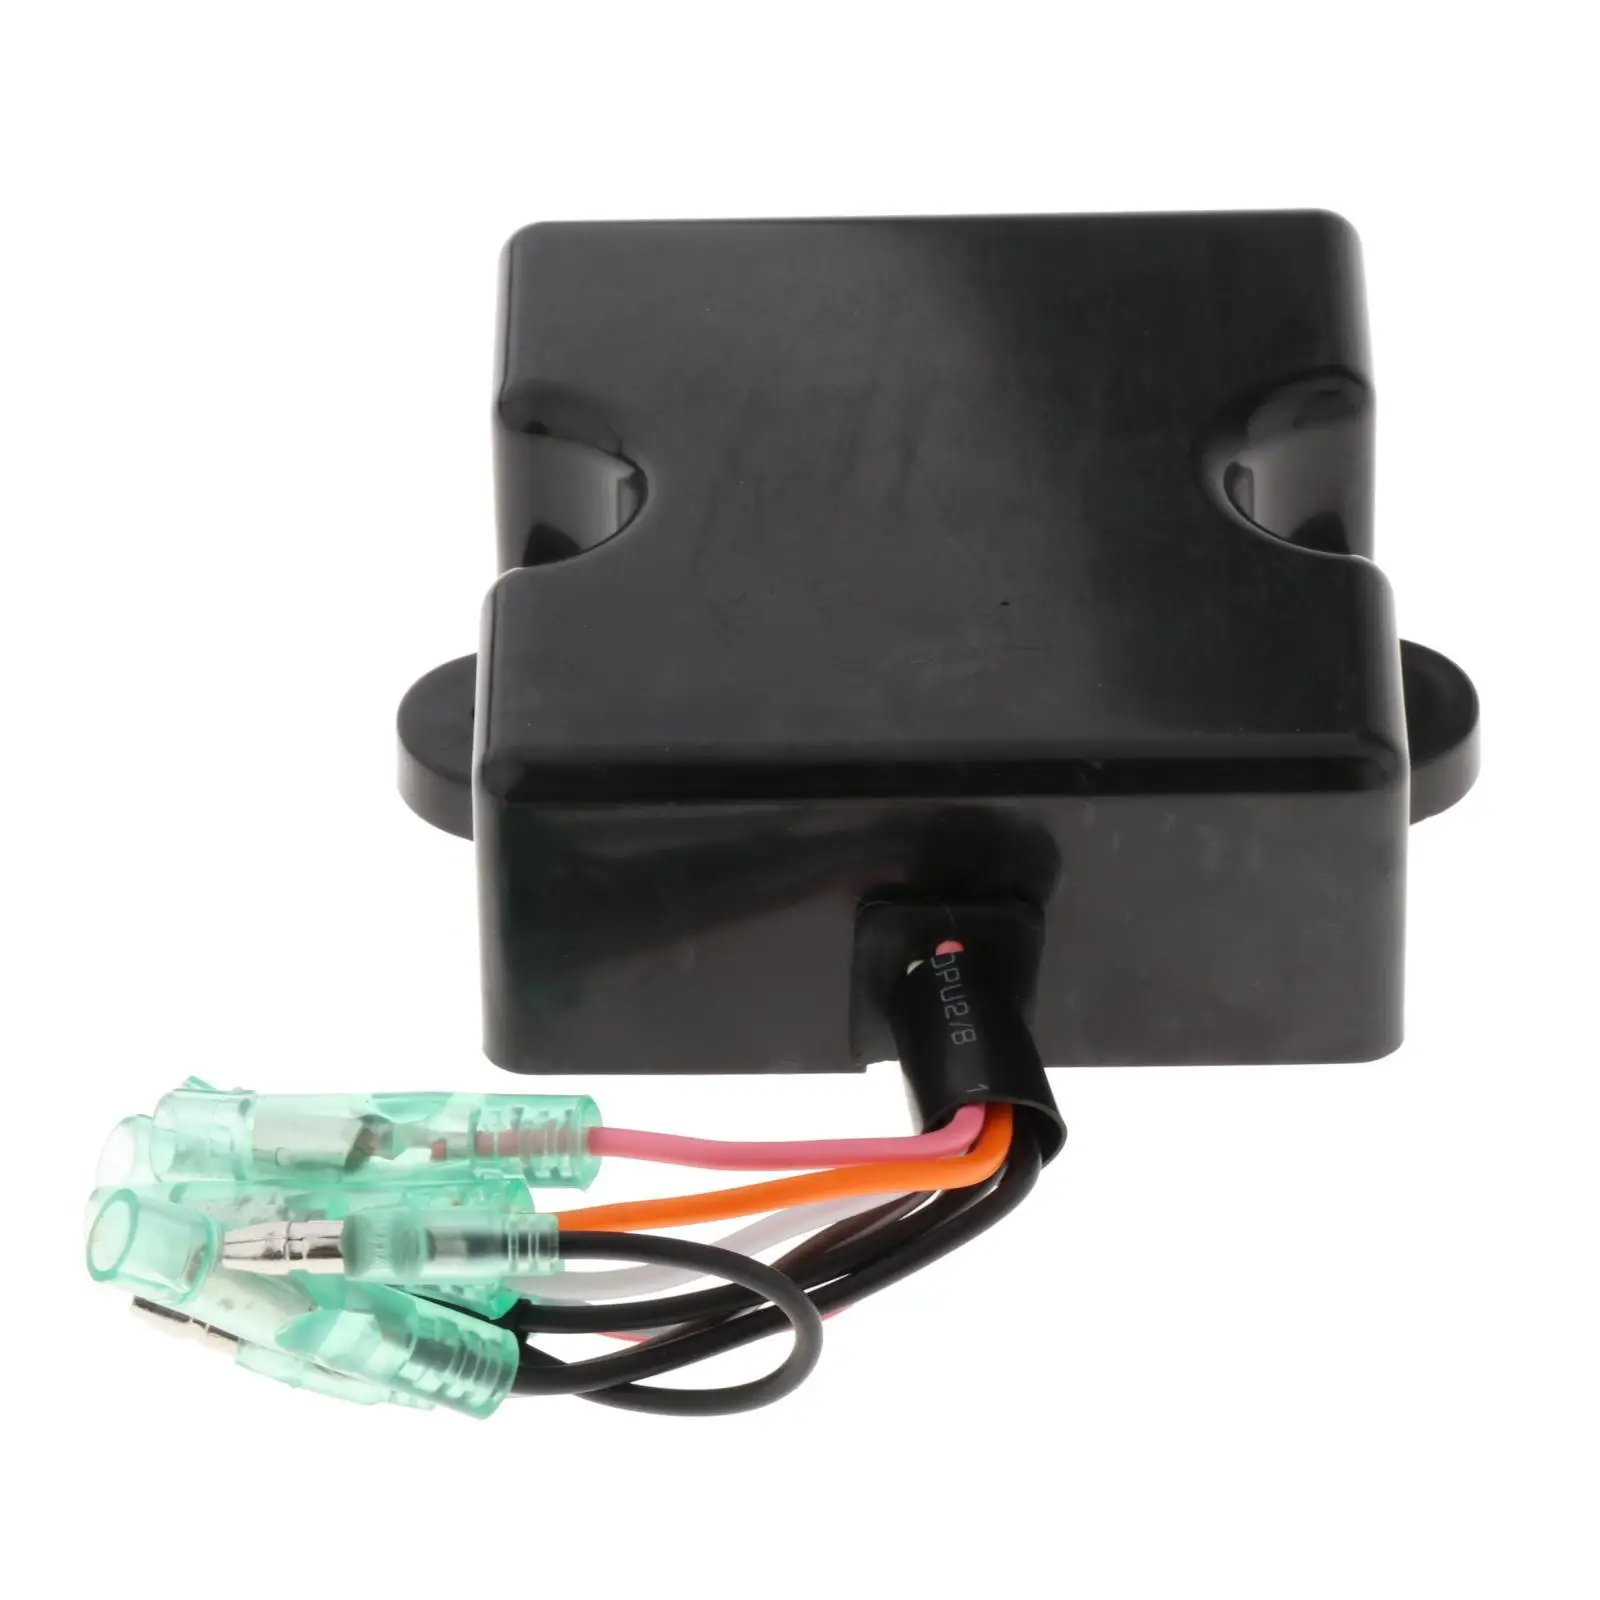 Cdi Igniter Module Replacement for Yamaha Superjet Wave Wave